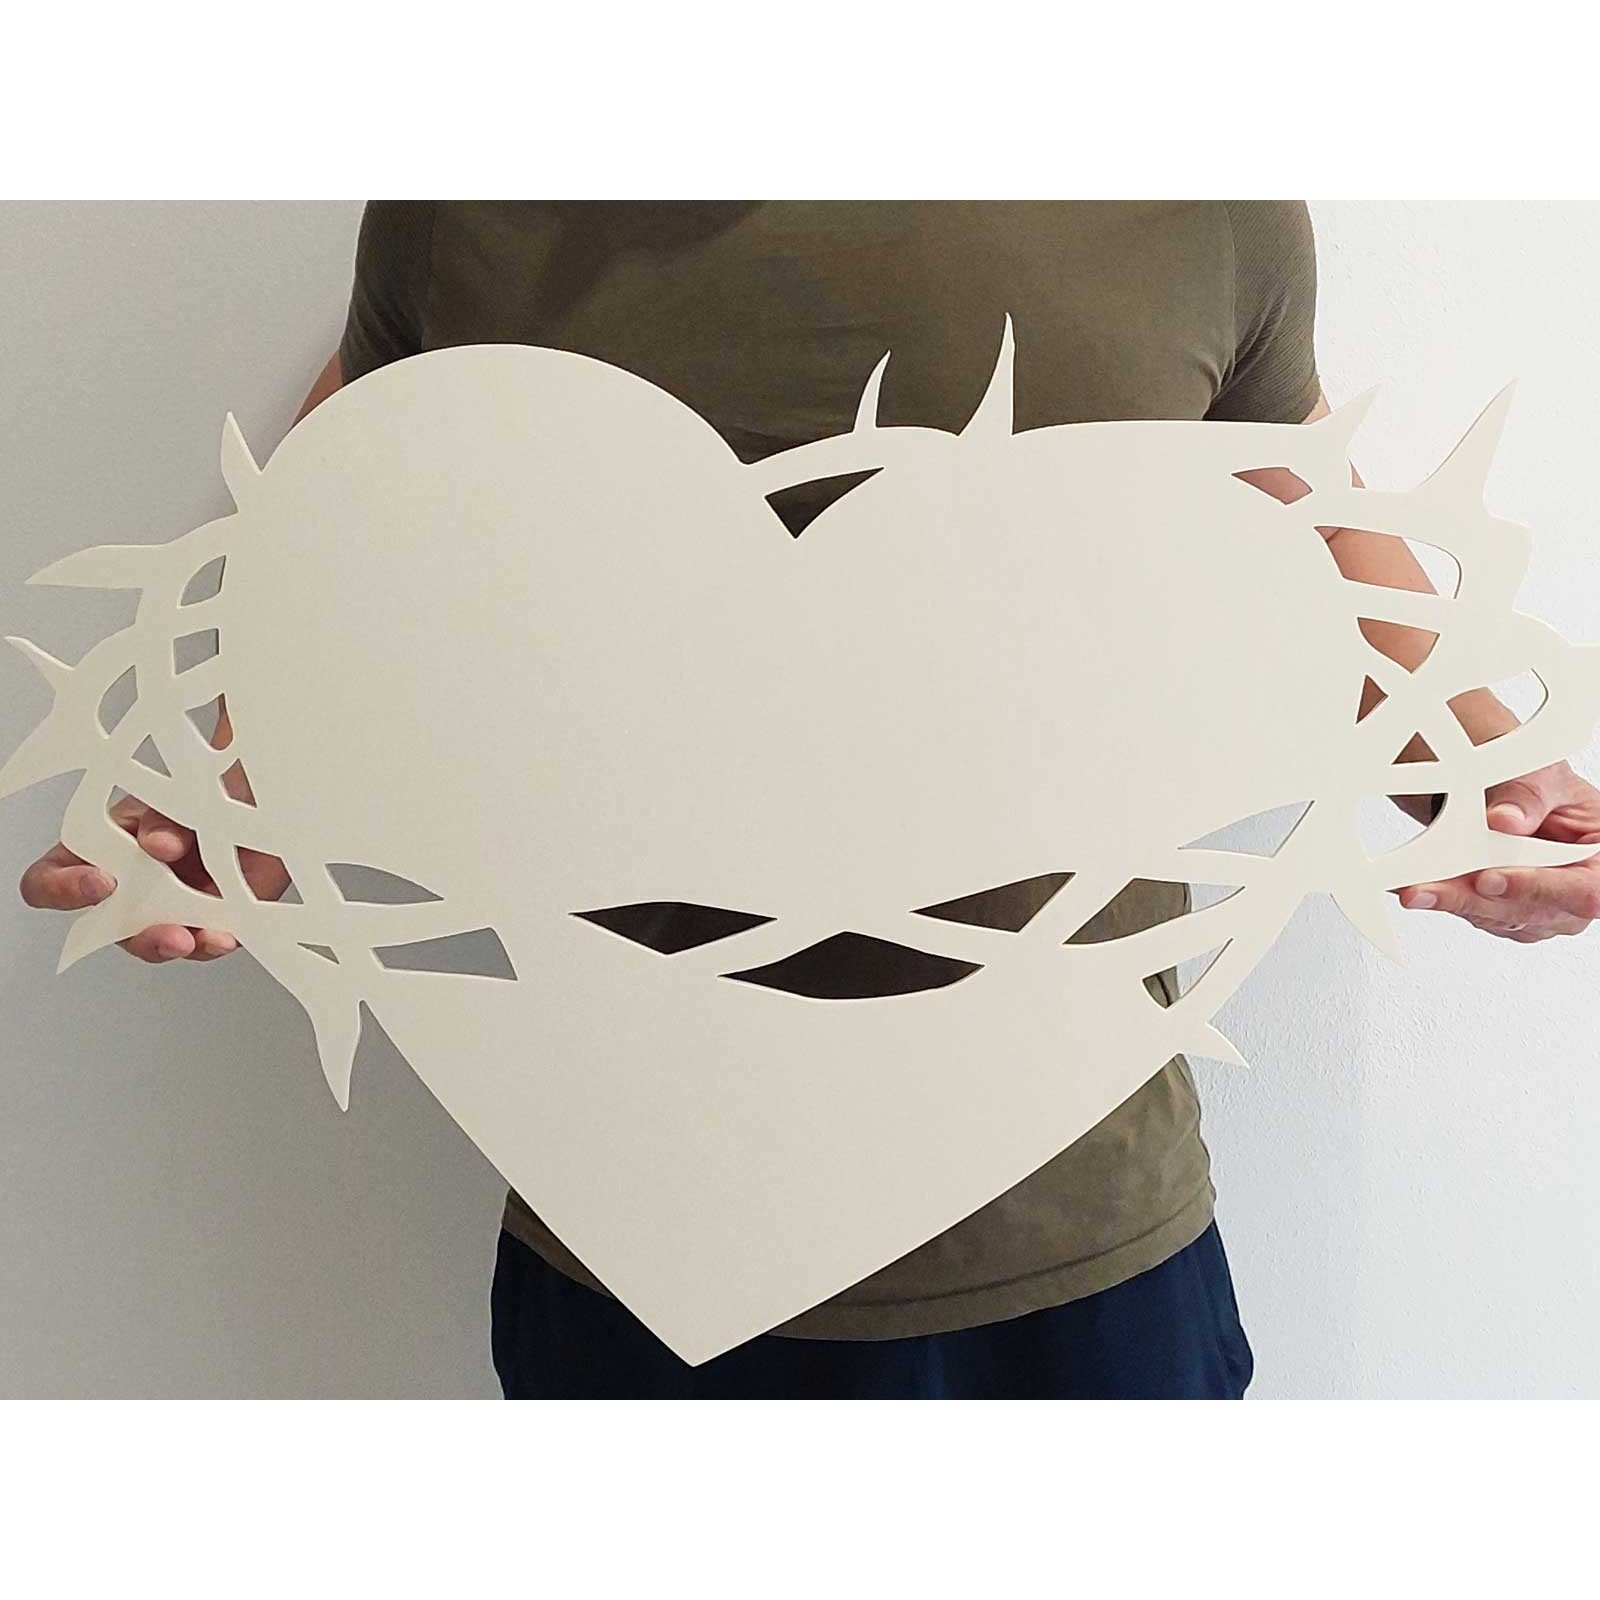 Heart with Jesus' crown - Divine Heart 80cm | LYMFY.eu | First holy communion